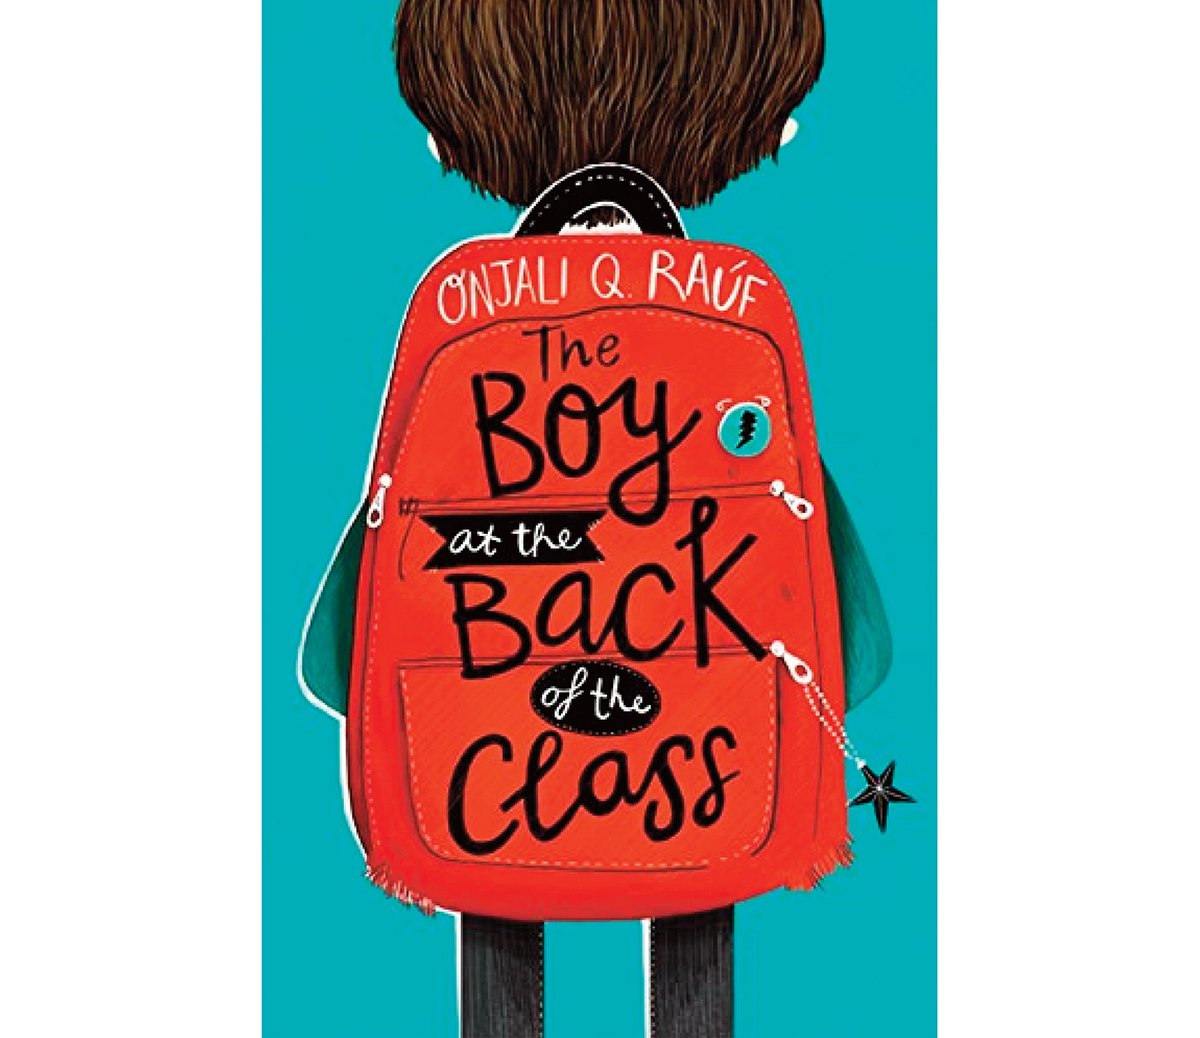 pippa-curnick-the-boy-at-the-back-of-the-class-cover-illustration.jpg